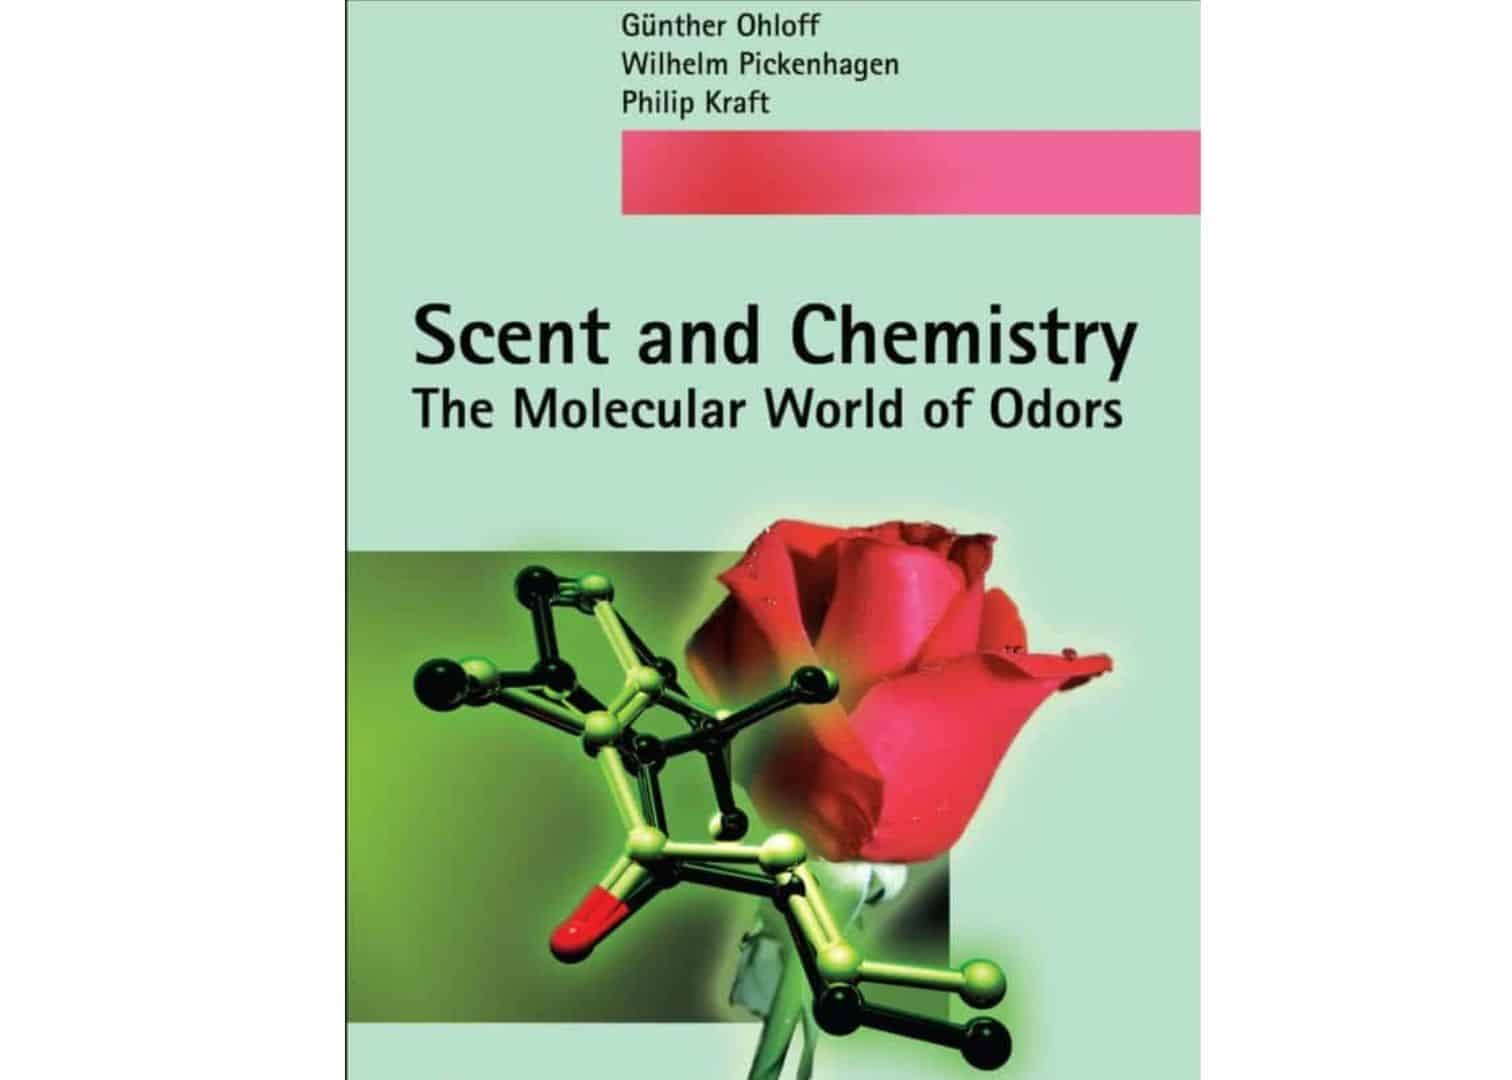 A photo of the cover of Scent and Chemistry The Molecular World of Odours